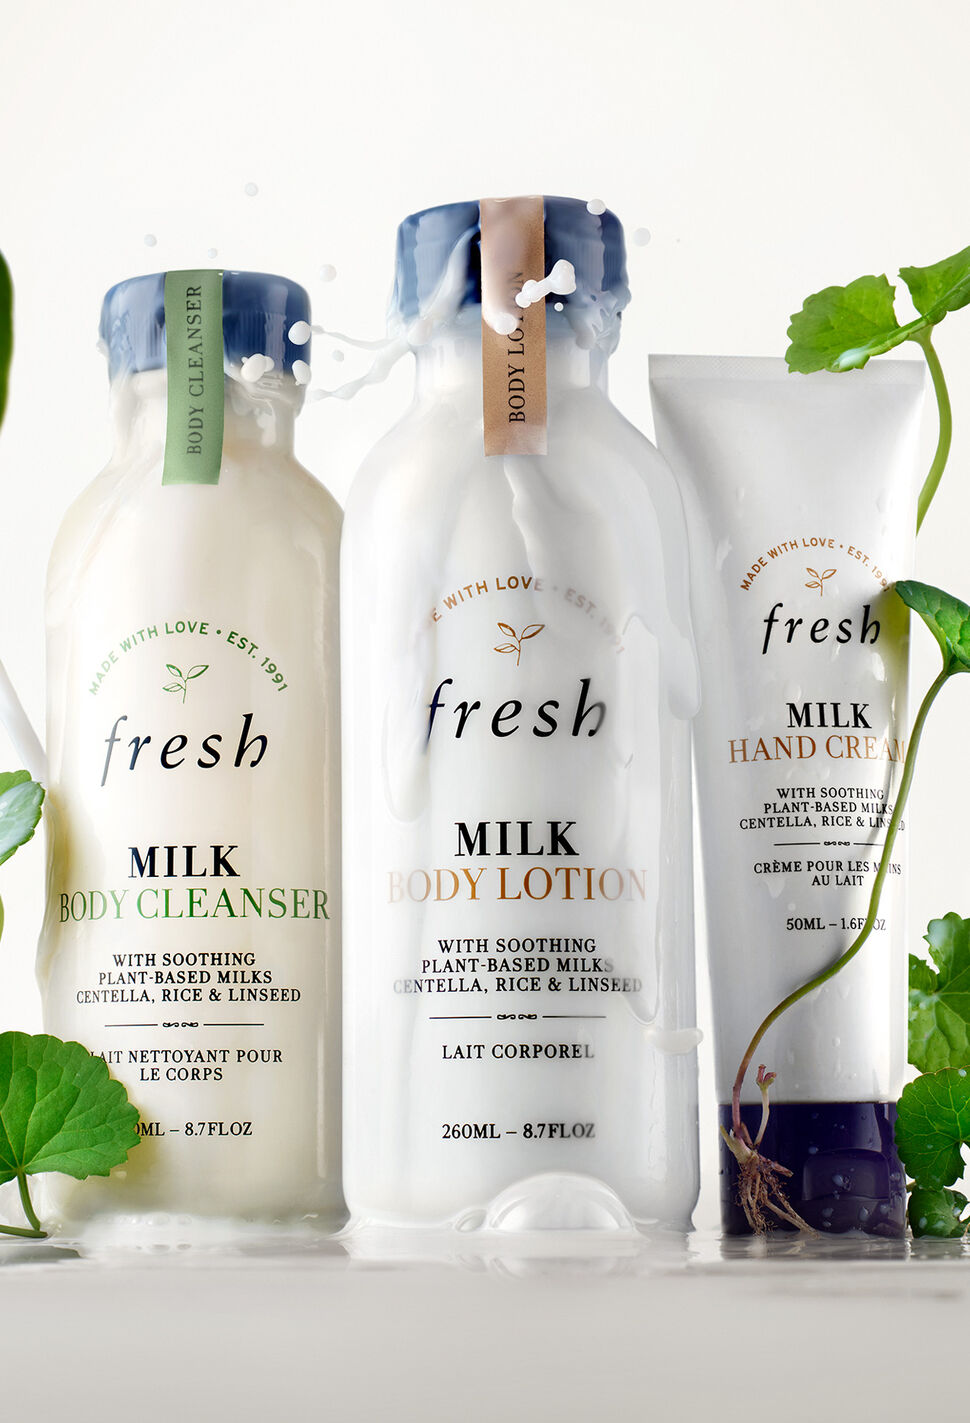 Q&A: Founder of Fresh, Lev Glazman on the brand's sustainability